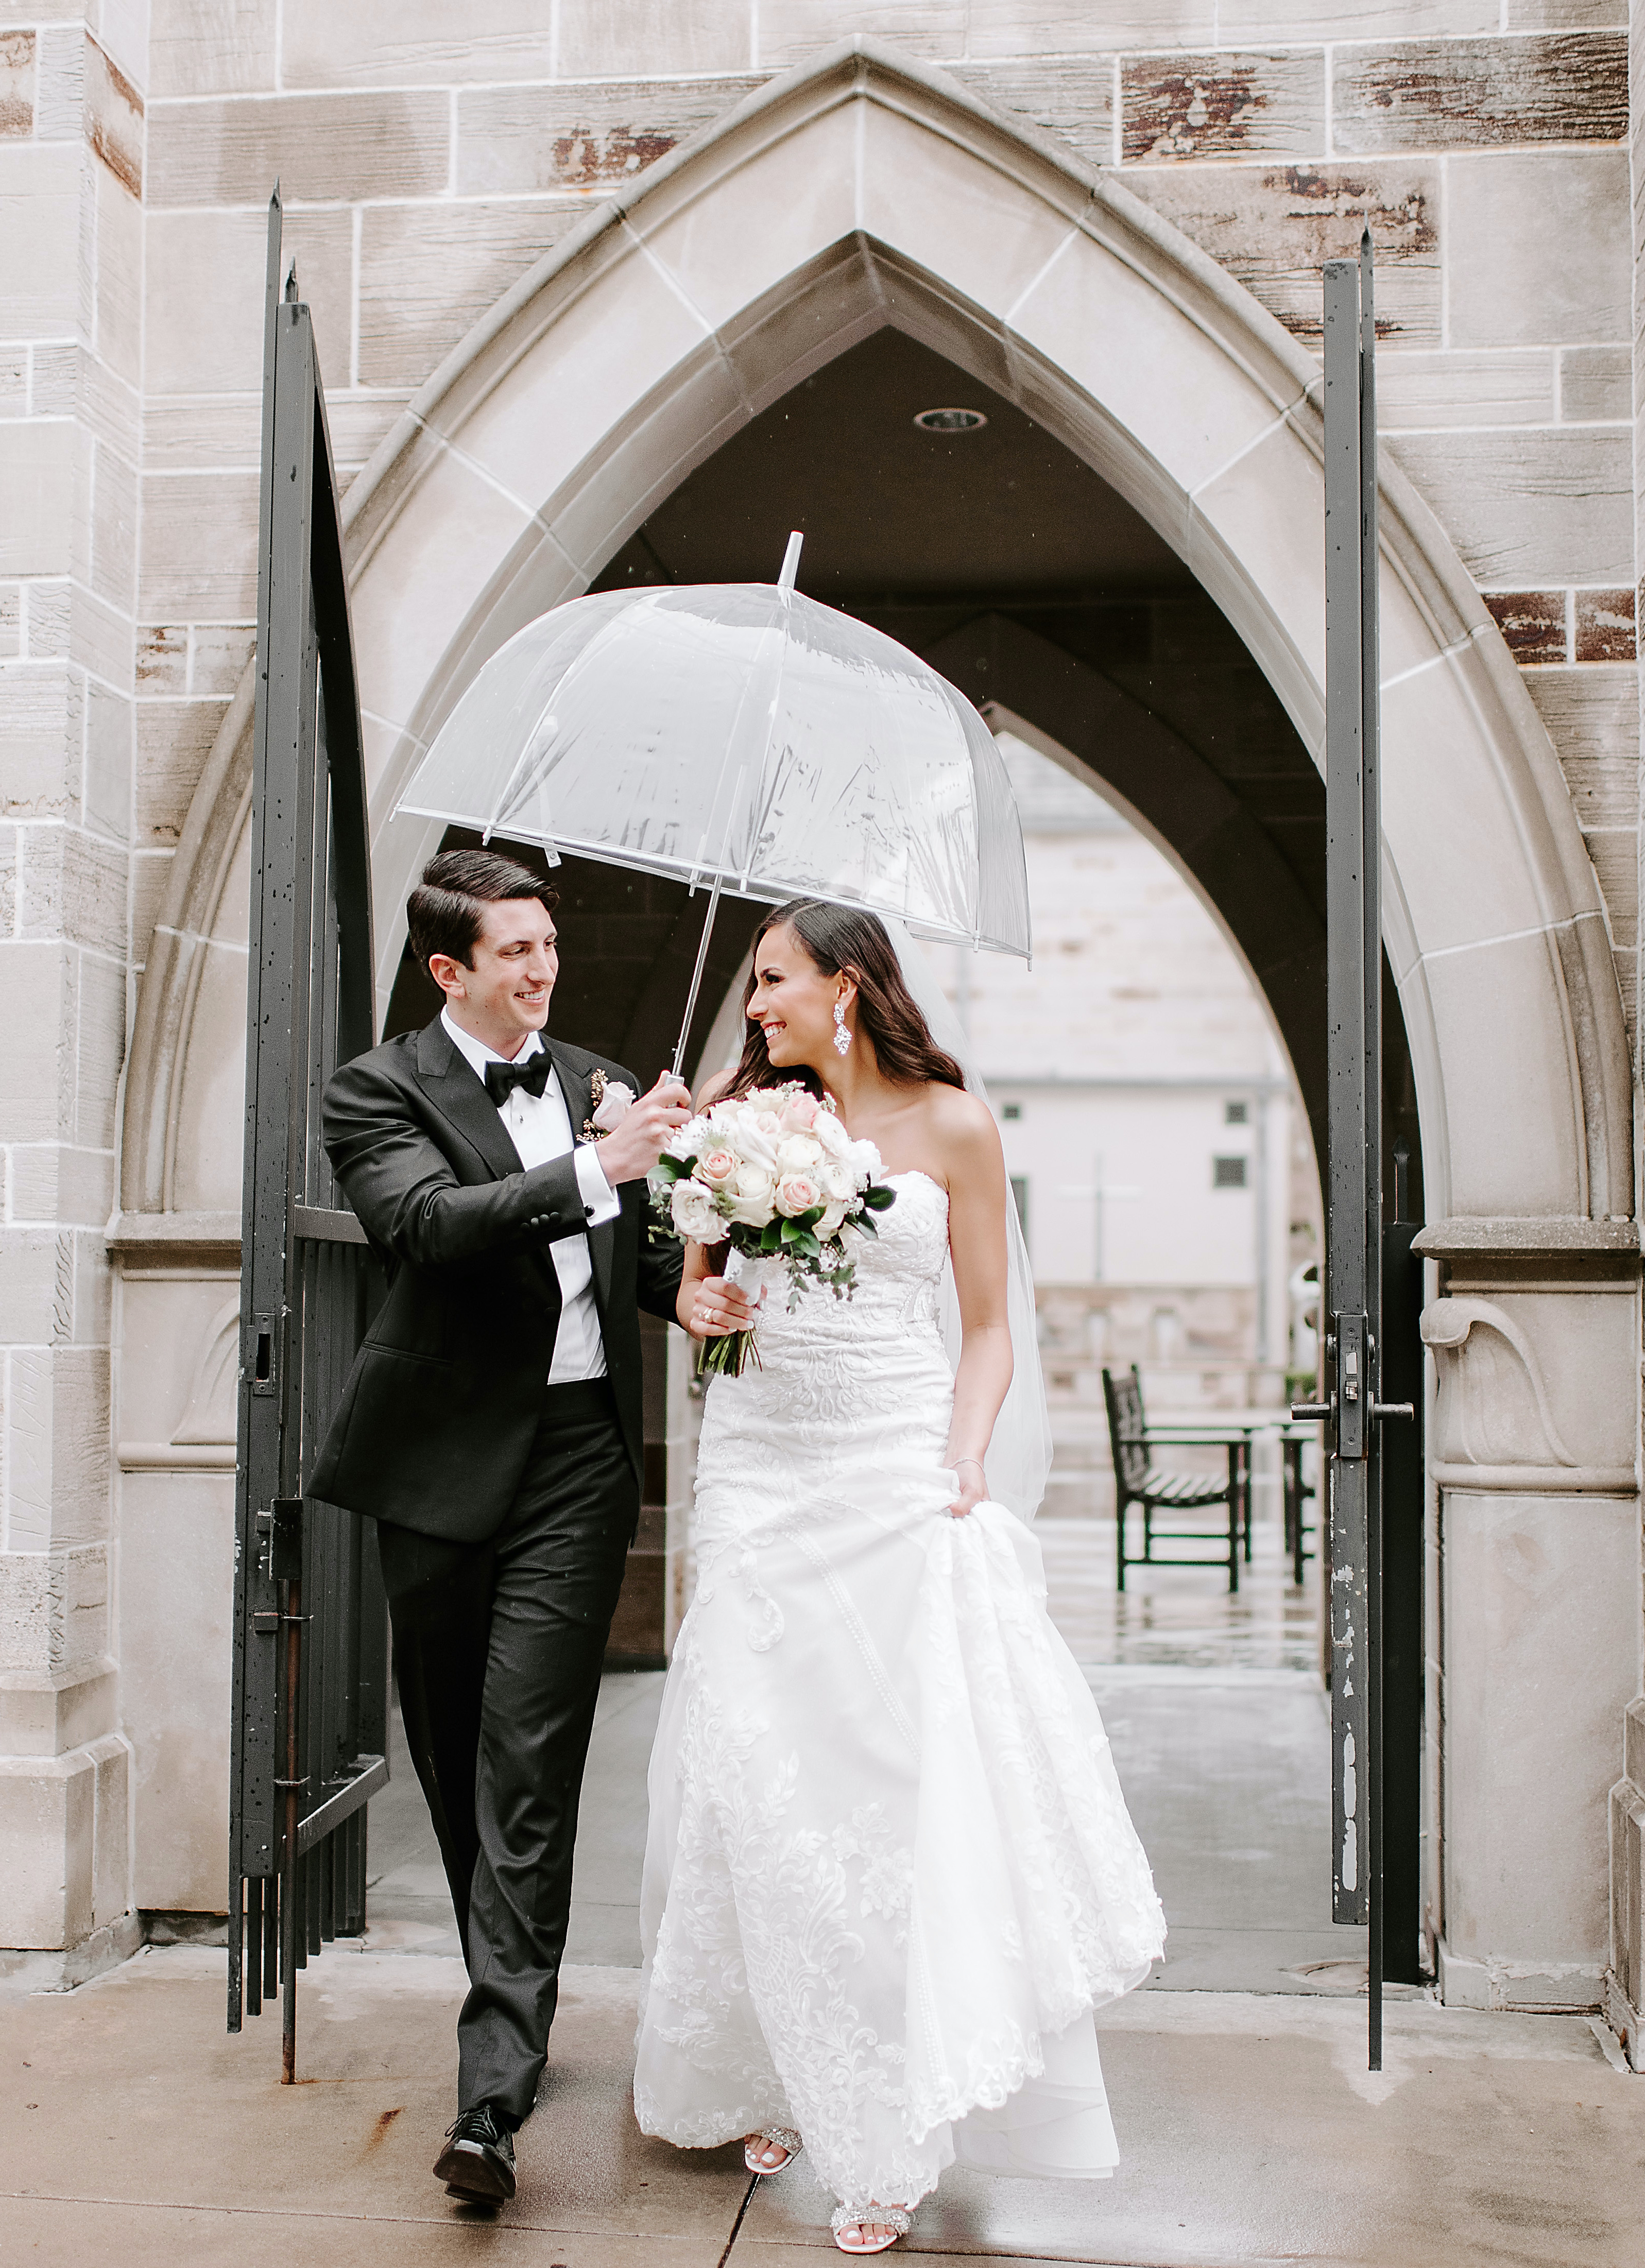 The groom holds a clear umbrella over the bride's head after their elegant rainy wedding.